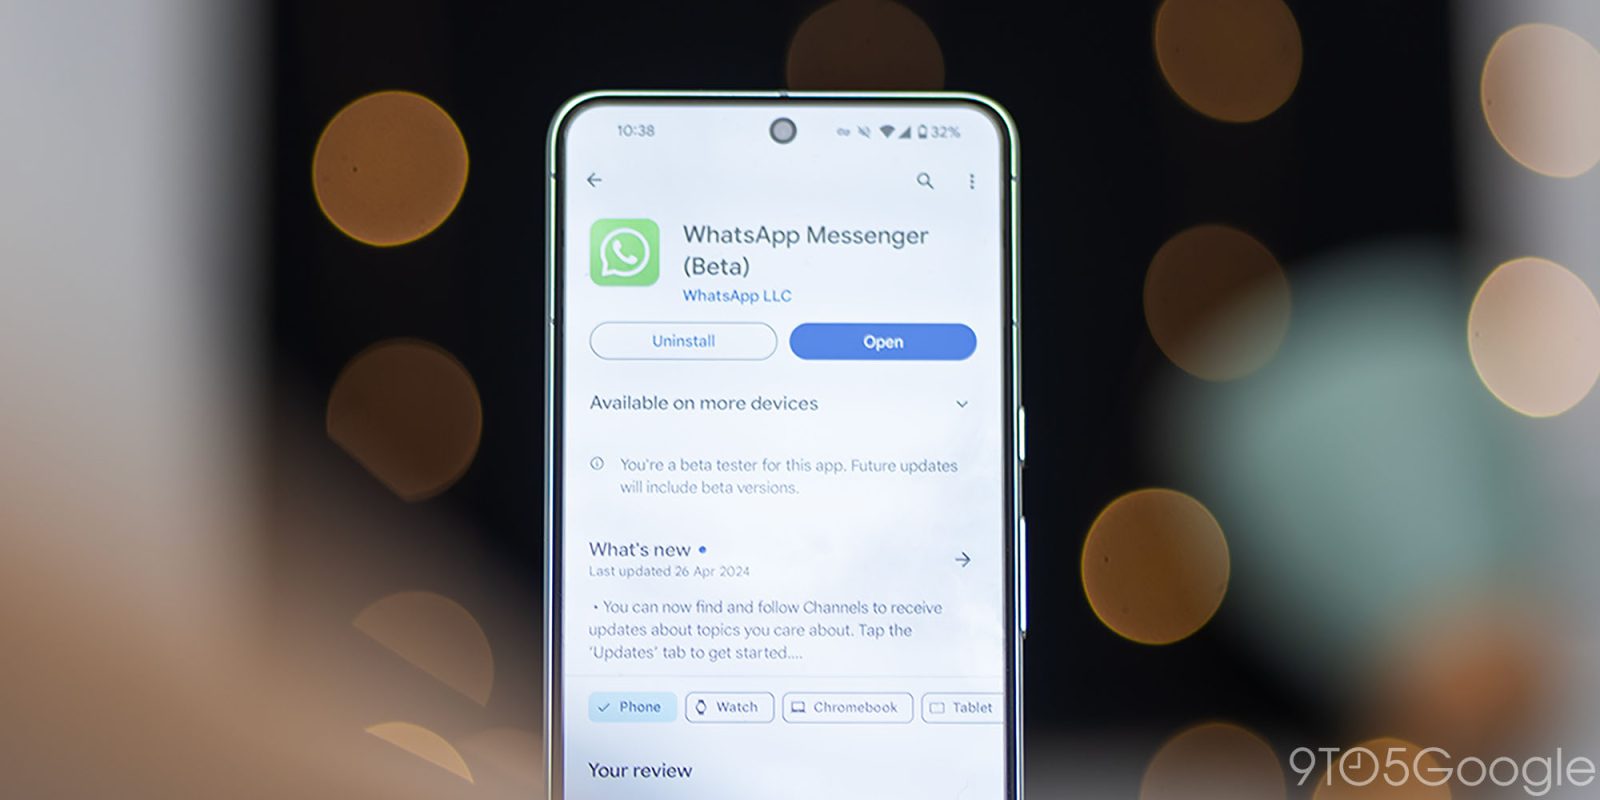 [Update: Fix rolls out] WhatsApp bug breaks ability to send video from Android devices